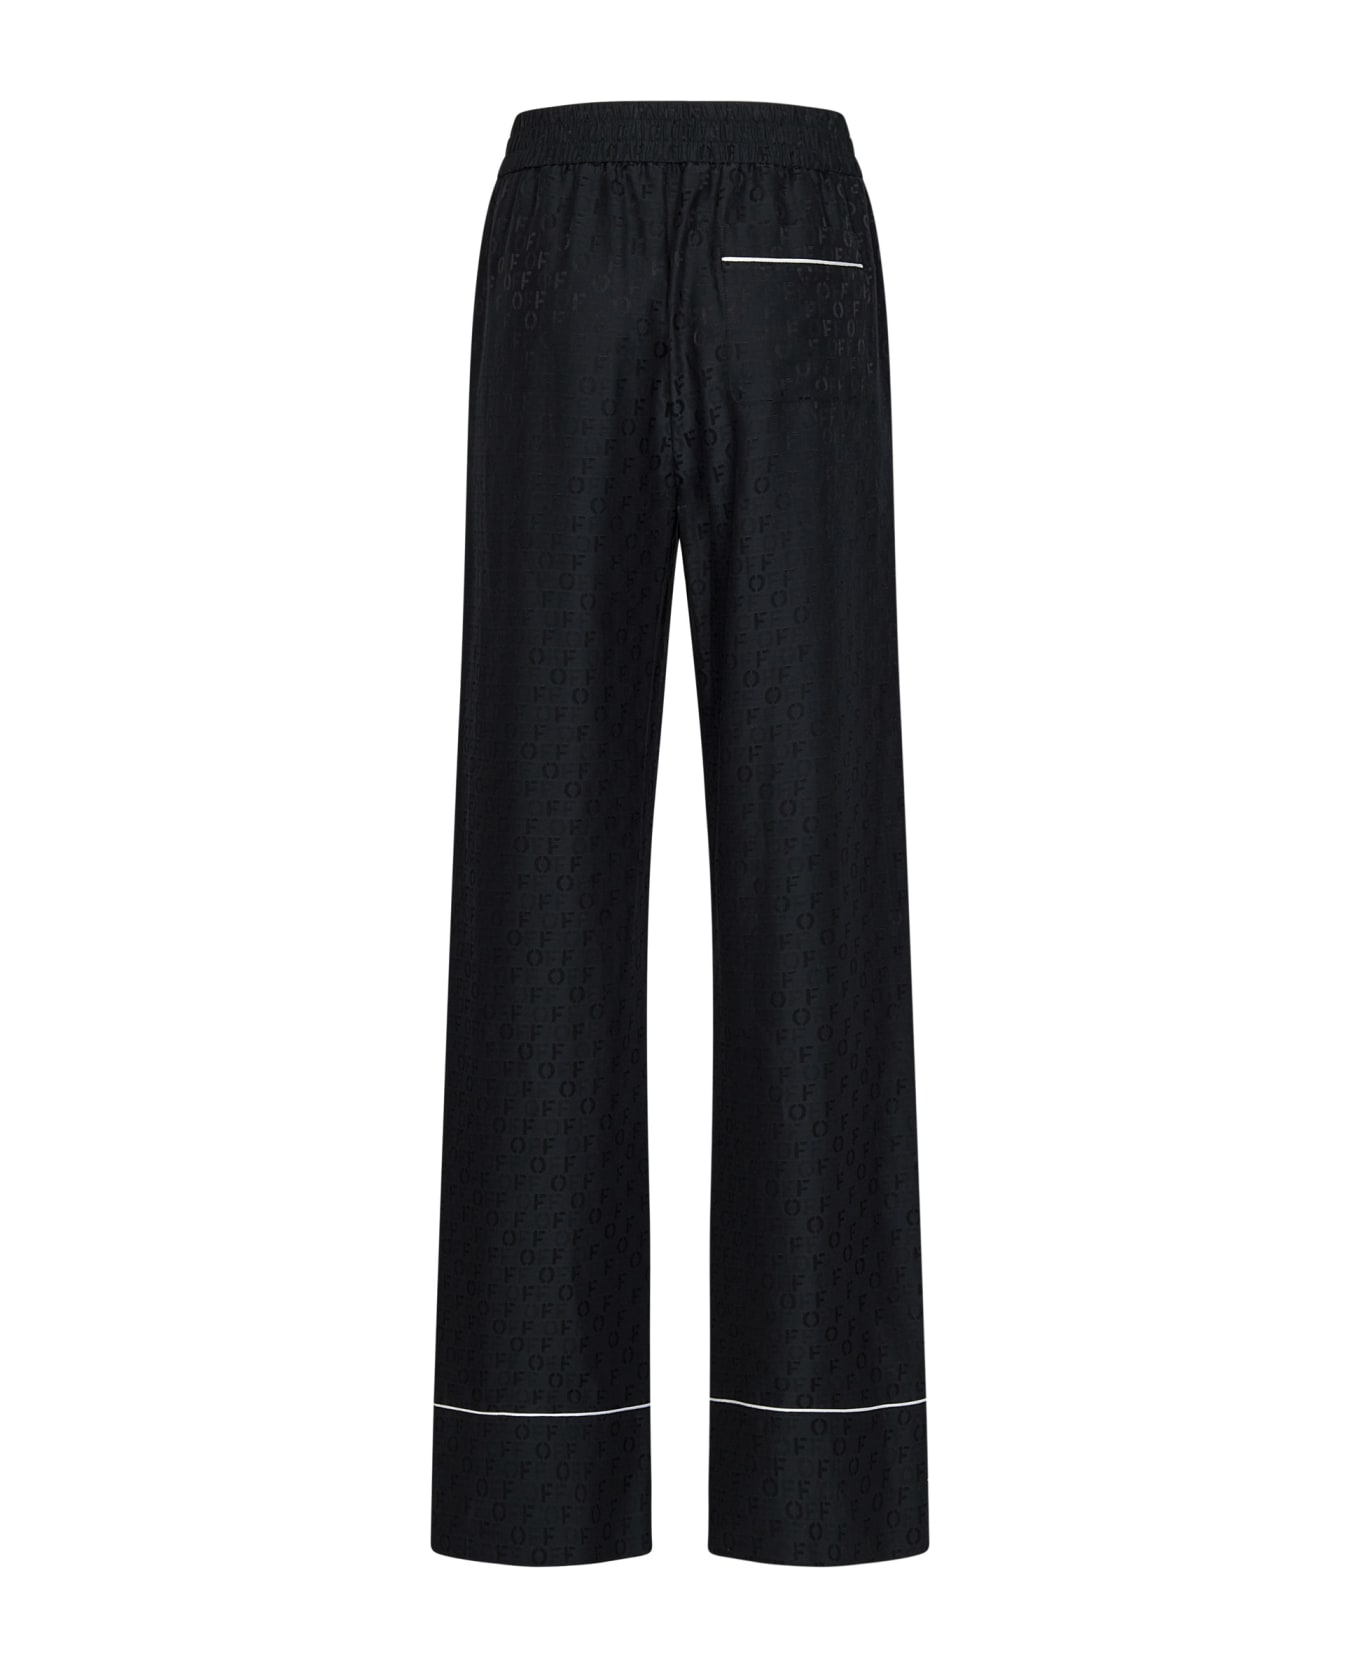 Off-White Silk Blend Trousers - black ボトムス